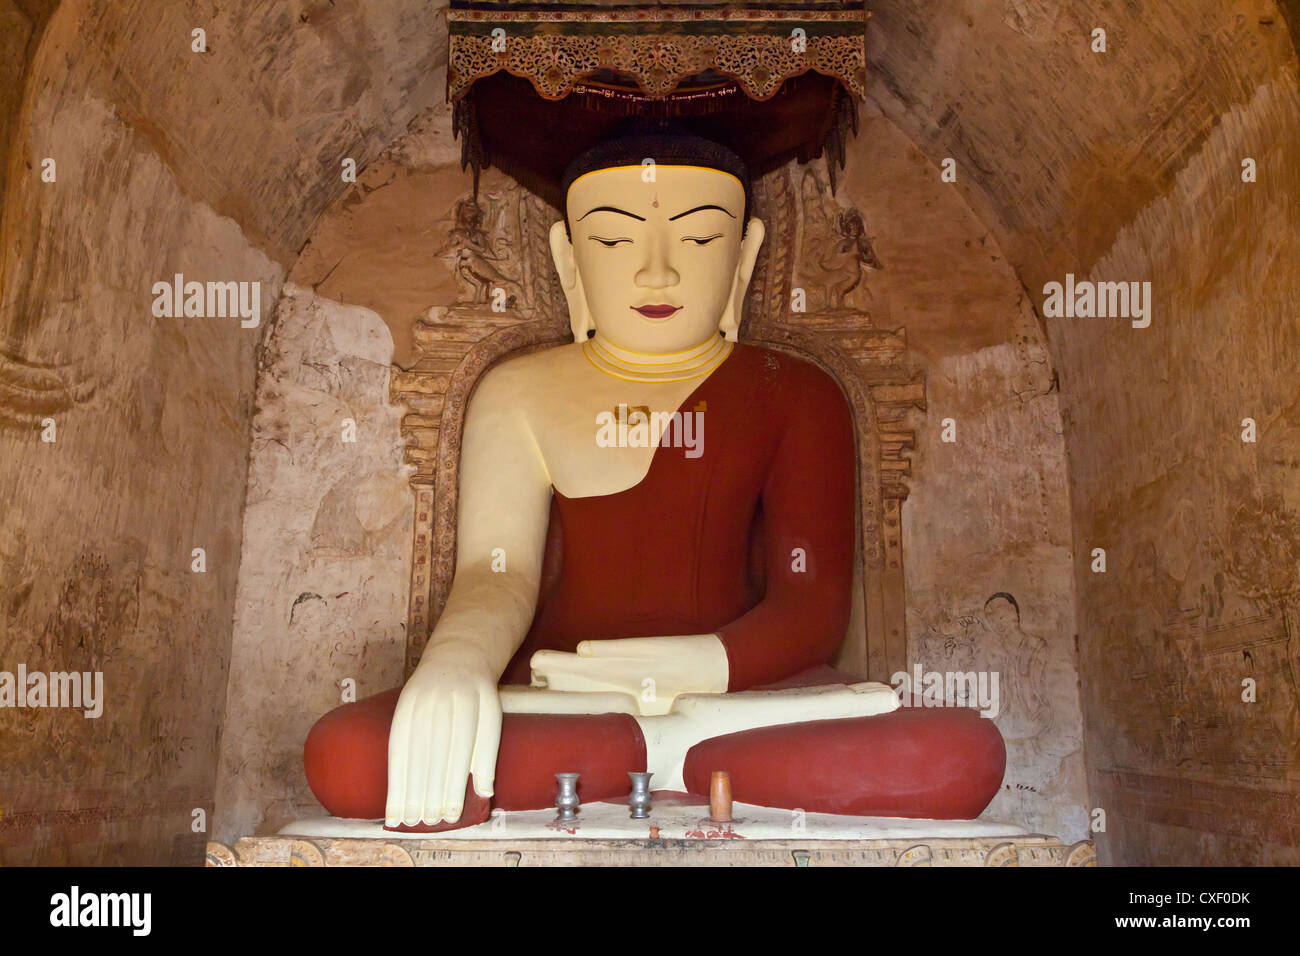 BUDDHA STATUES inside SULAMANI TEMPLE which was built in 1183 by Narapatisithu - BAGAN, MYANMAR Stock Photo